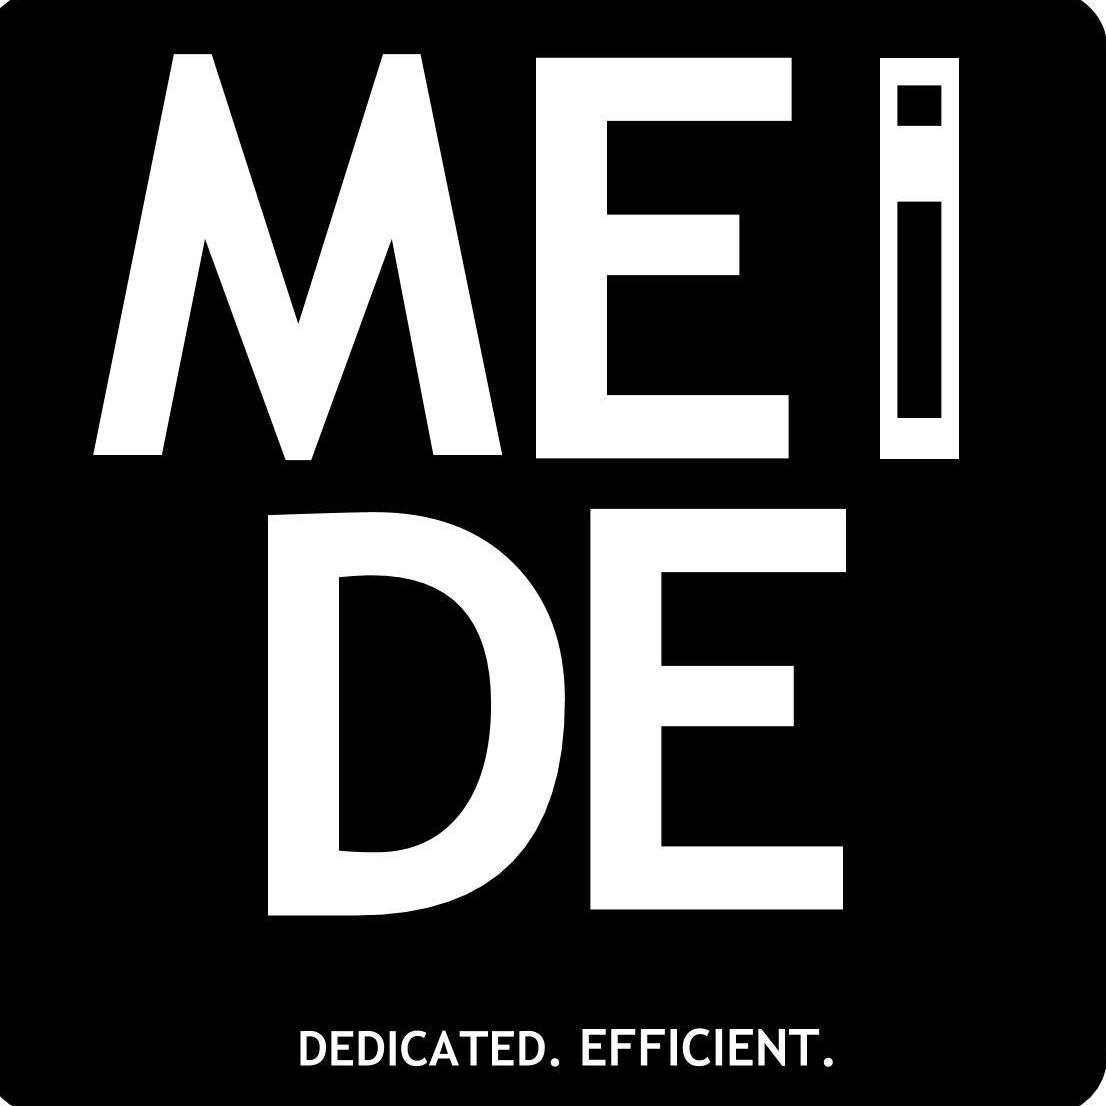 Best Cleaning Services Singapore - MEIDE